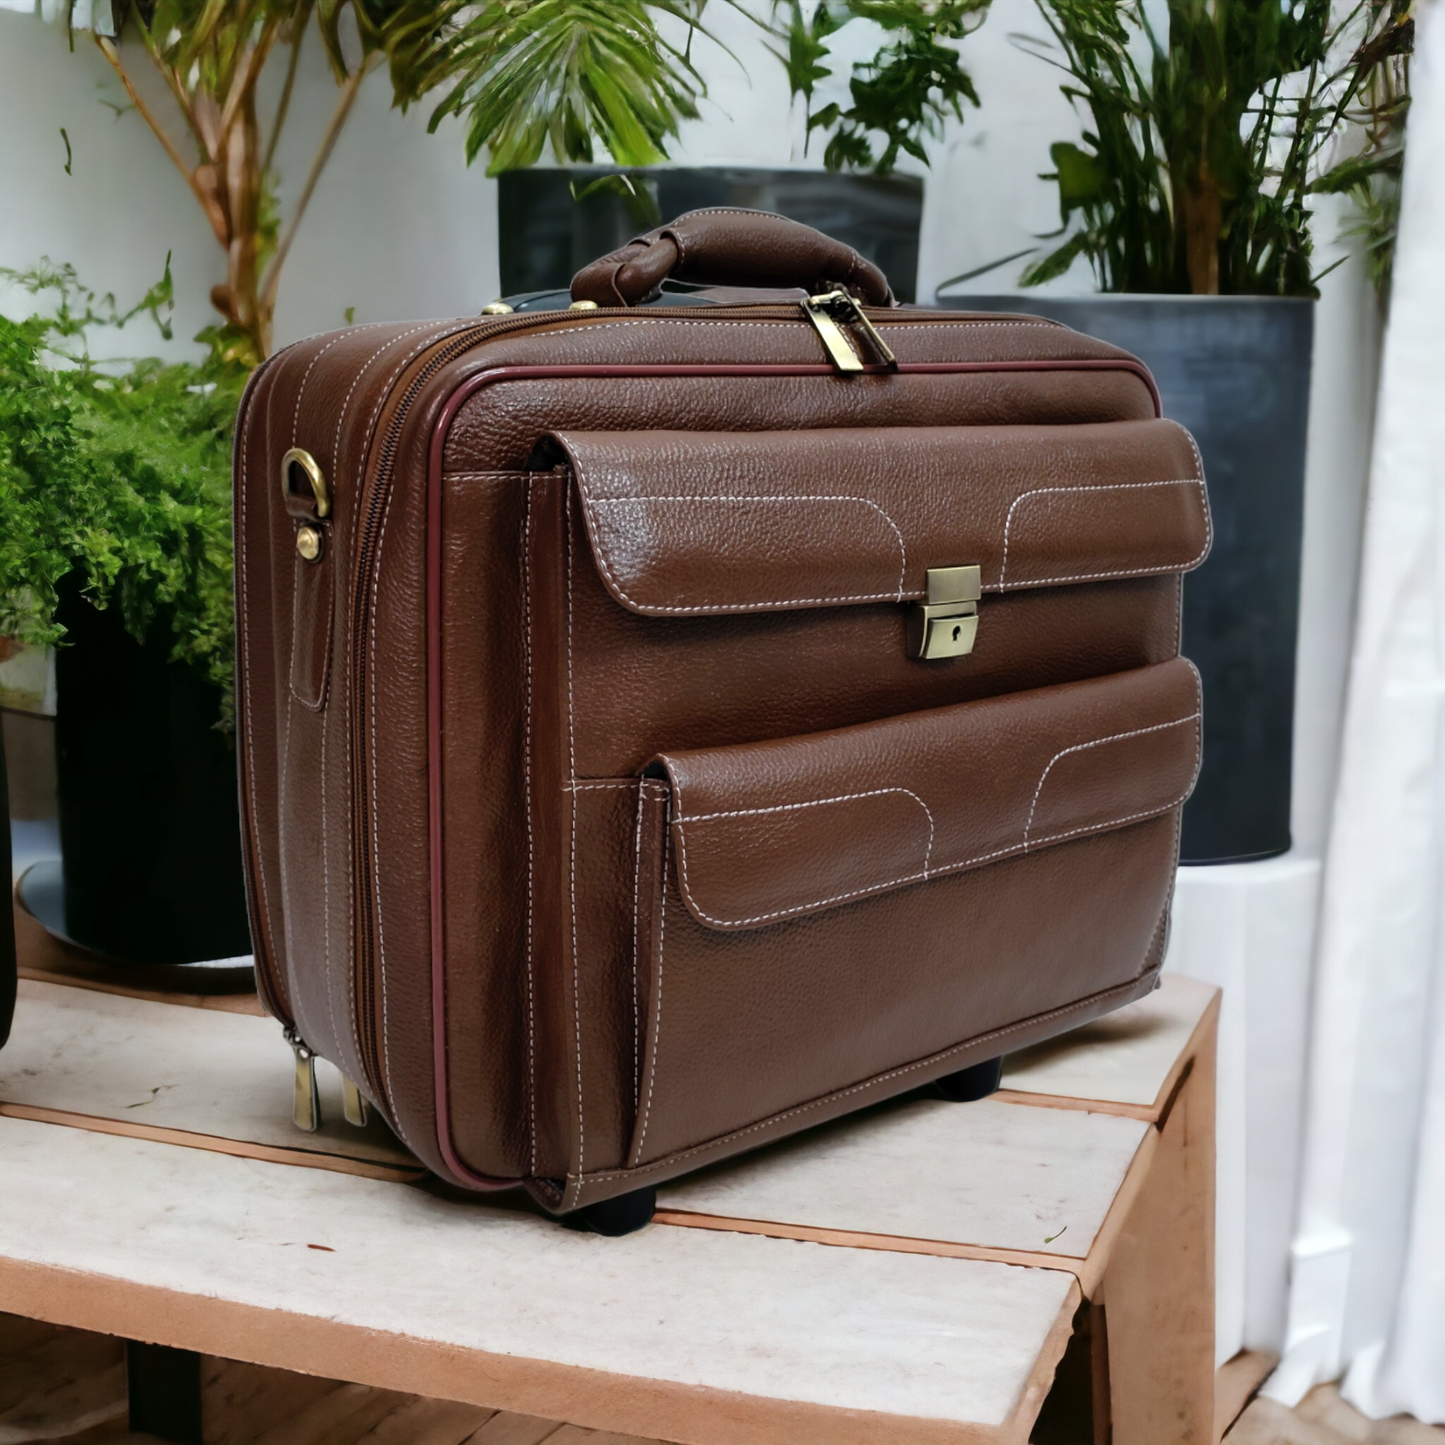 Genuine Leather Trolley Bag Cabin Trolley Leather Weekender Leather Luggage with Wheels Tourist Luggage Overnighter Trolley